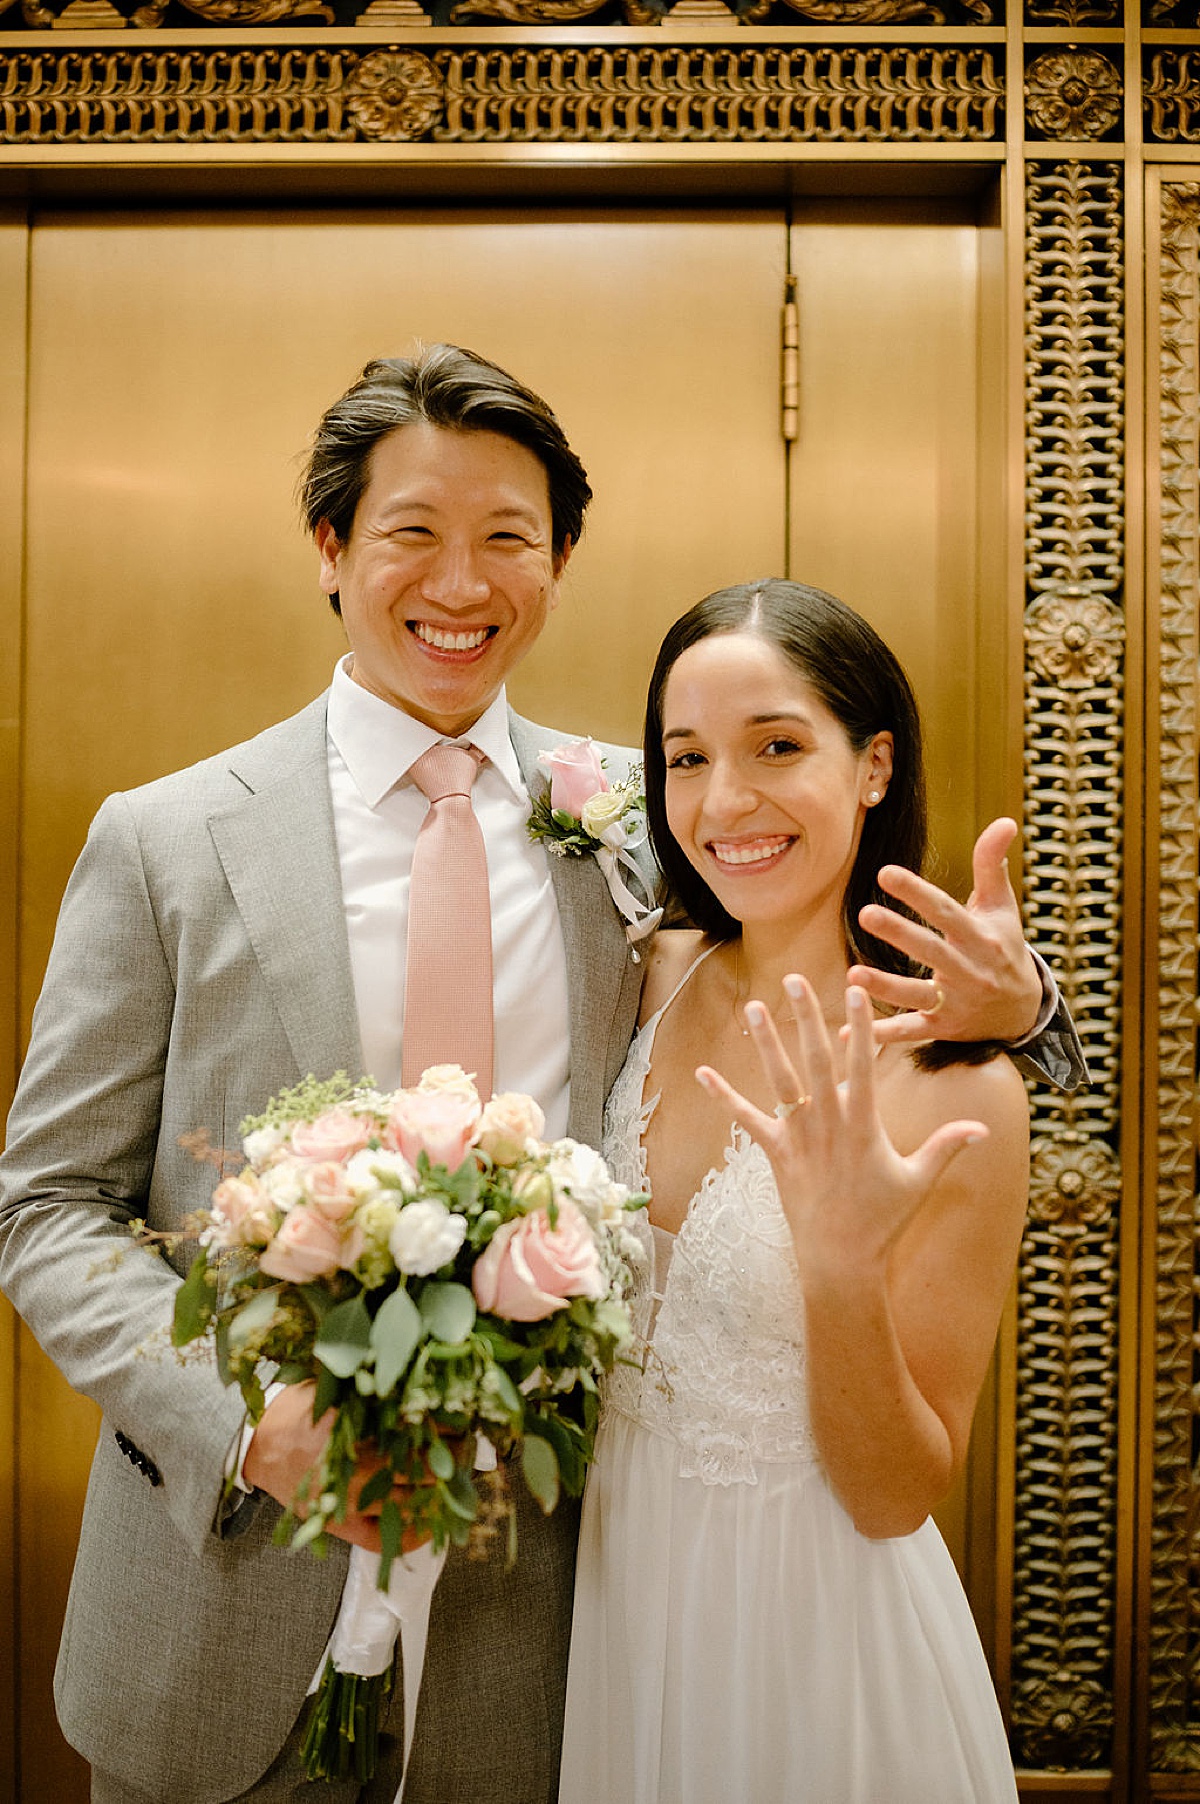 groom in dapper gray suit and bride in delicate gown show off wedding rings in front of gold doors during city hall sweetheart elopement